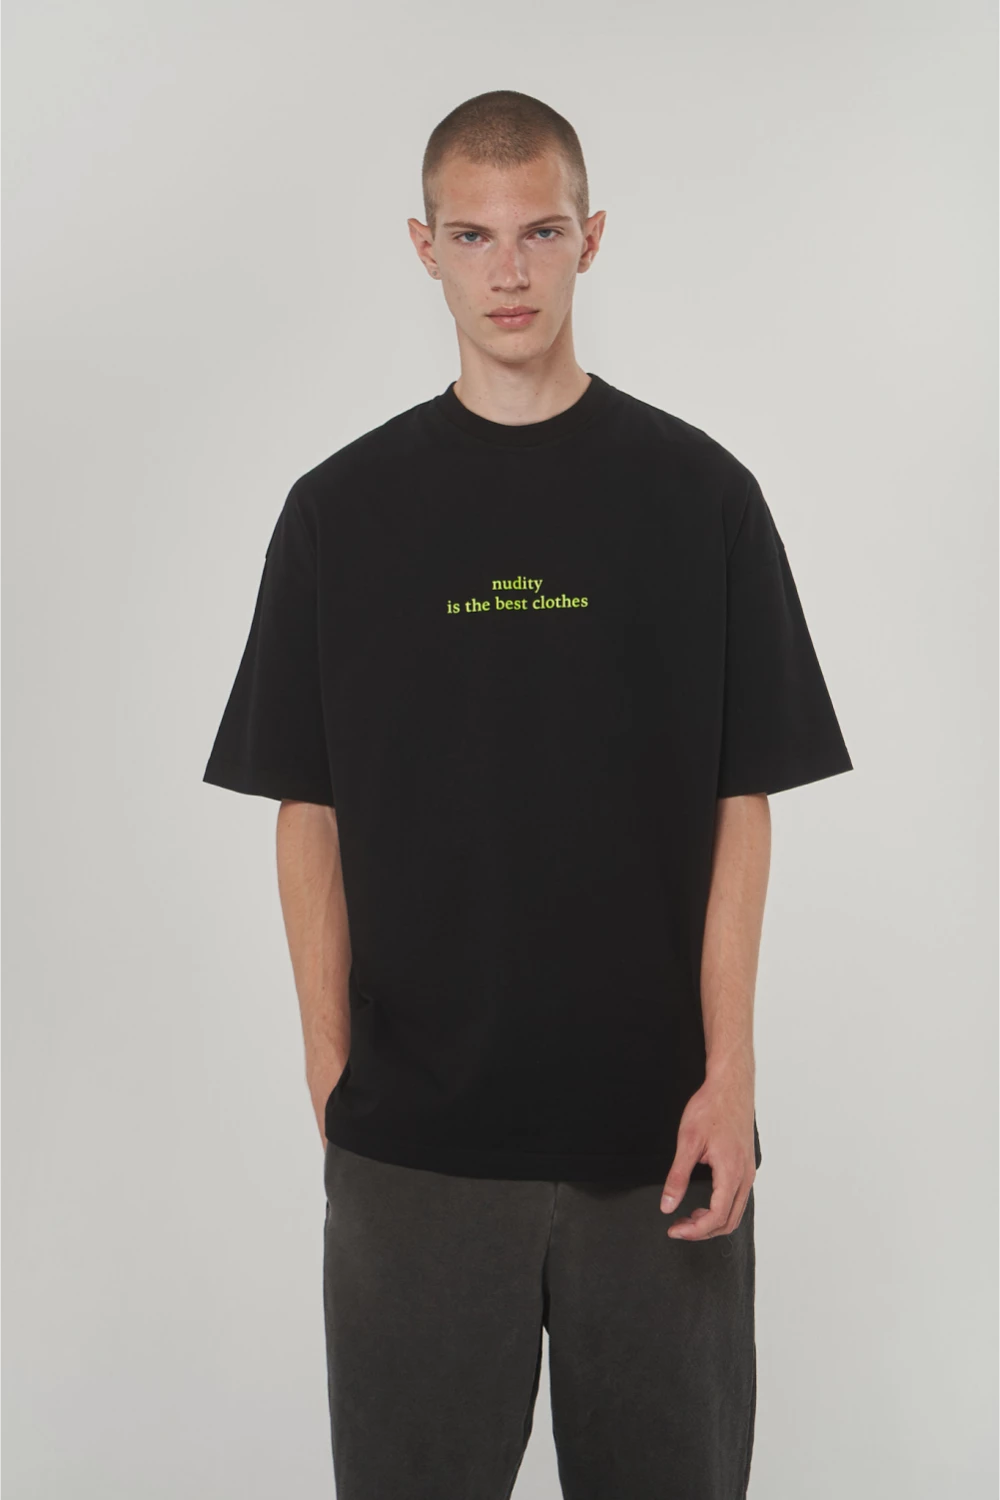 t-shirt "nudity" in black color